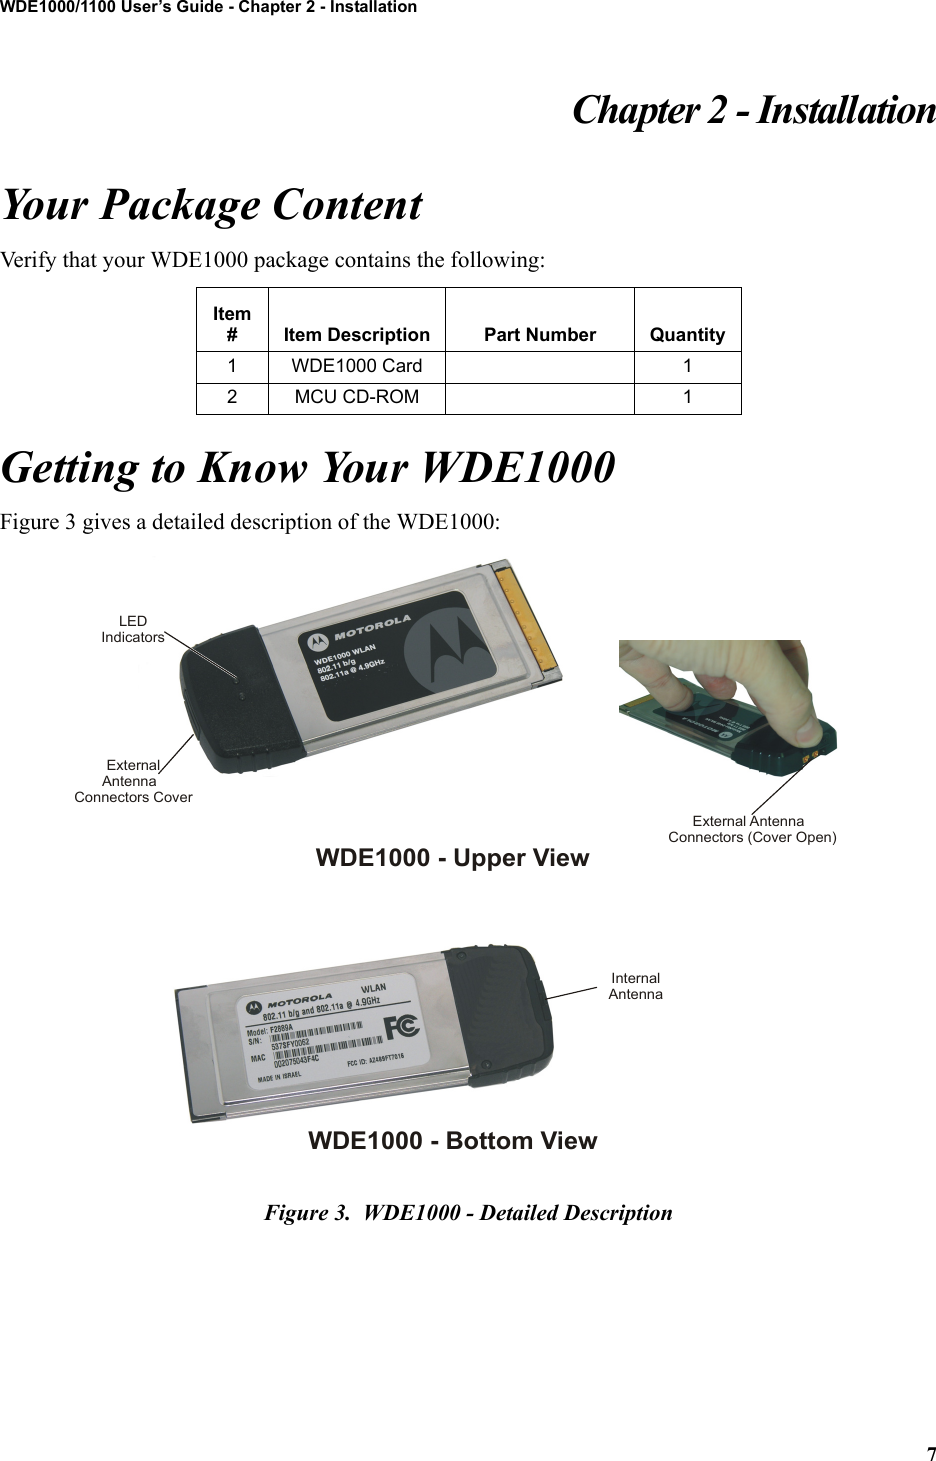 7WDE1000/1100 User’s Guide - Chapter 2 - InstallationChapter 2 - InstallationYour Package ContentVerify that your WDE1000 package contains the following:Getting to Know Your WDE1000Figure 3 gives a detailed description of the WDE1000:Figure 3.  WDE1000 - Detailed DescriptionItem # Item Description Part Number Quantity1 WDE1000 Card 12 MCU CD-ROM 1LEDIndicatorsInternalAntennaExternalAntenna Connectors CoverWDE1000 - Upper ViewWDE1000 - Bottom ViewExternal Antenna Connectors (Cover Open)